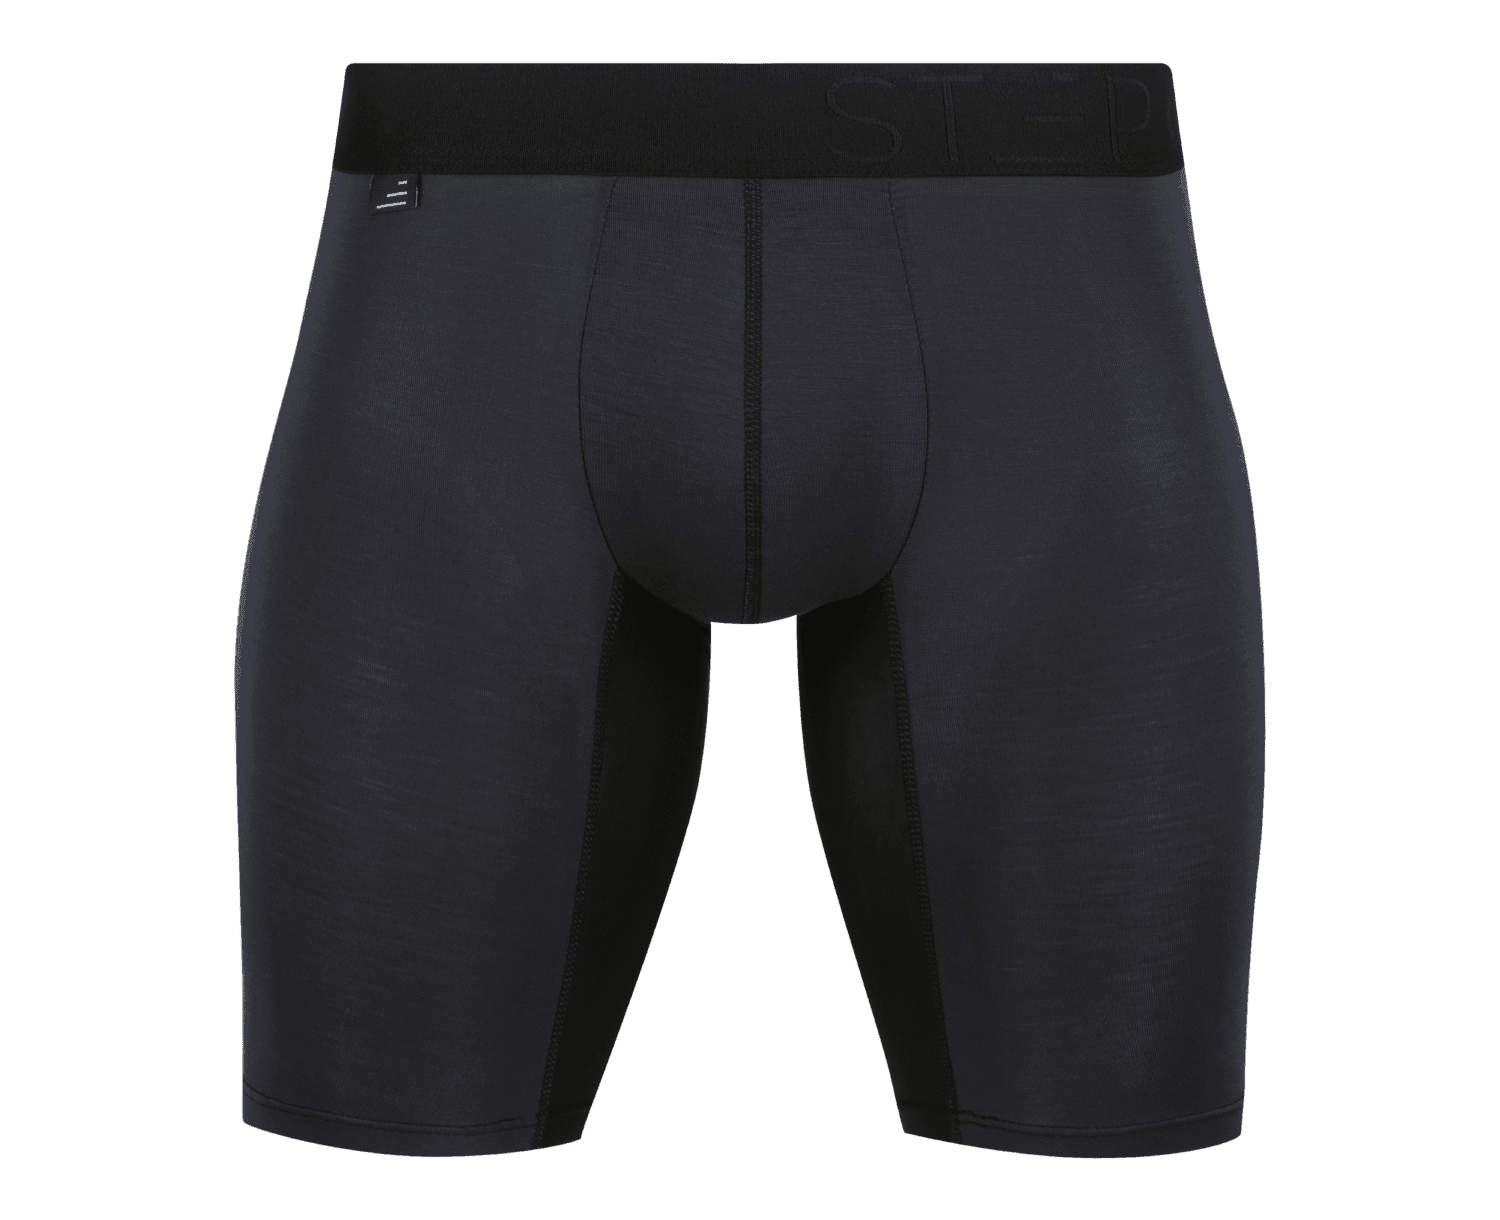 The wait is over, Step One: Black boxers are back! - Step One